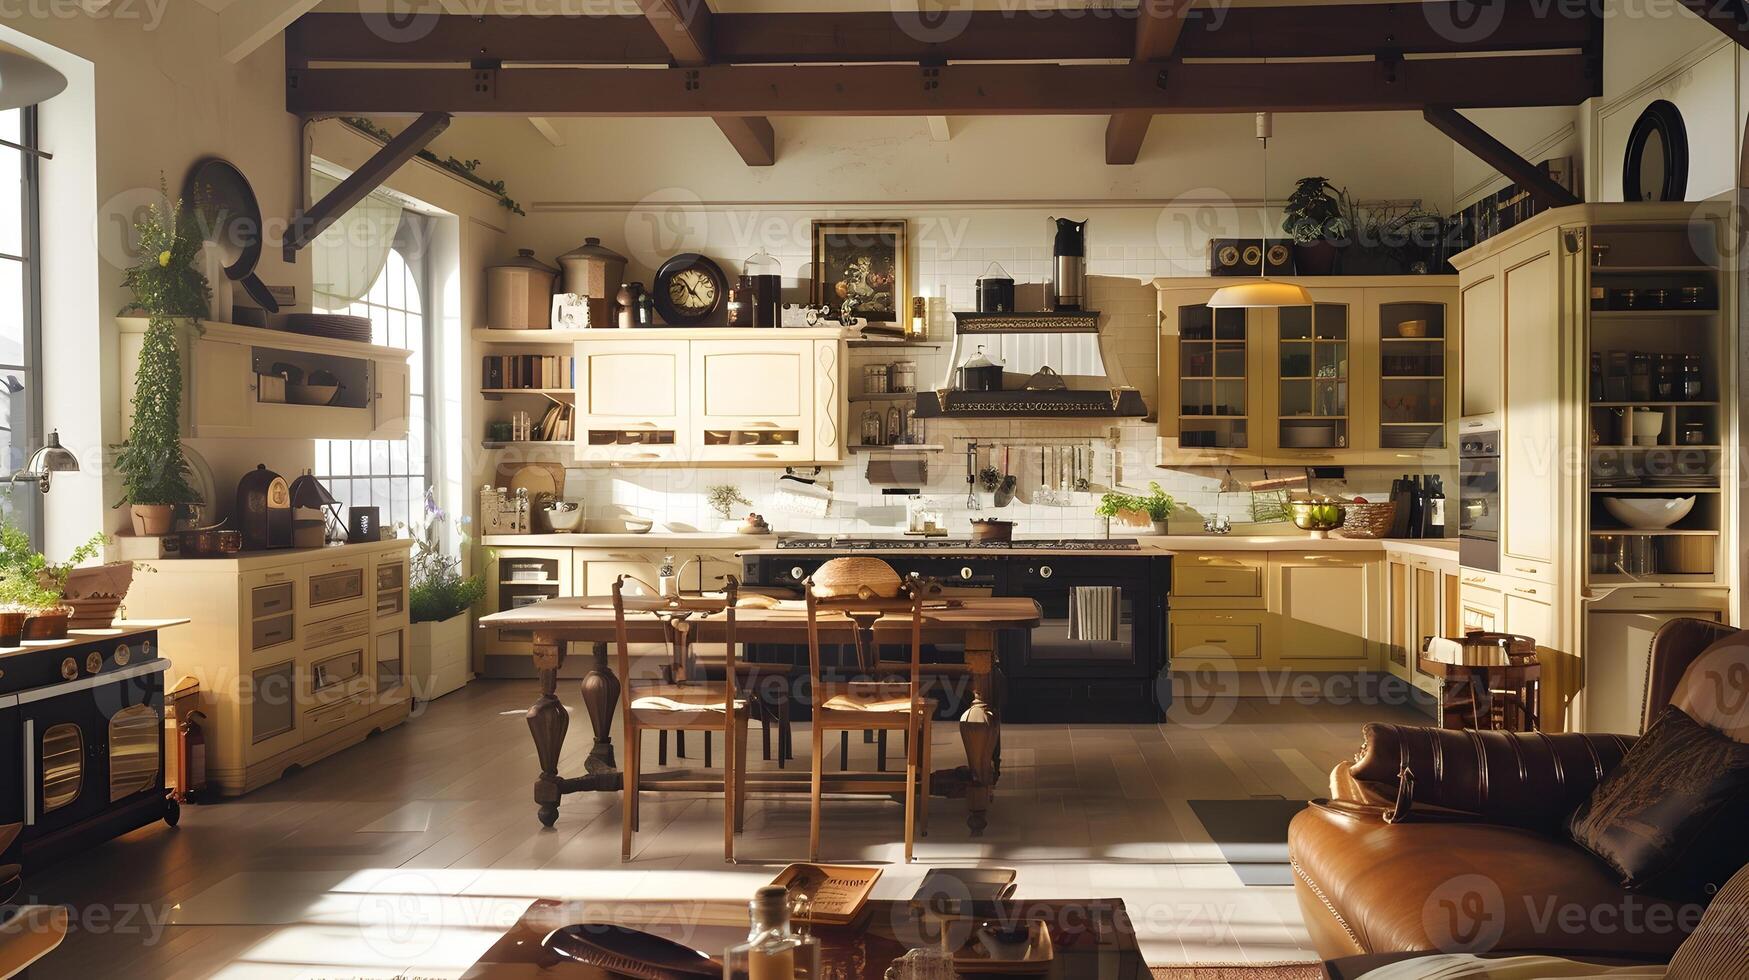 Cozy and Welcoming Rustic Farmhouse Kitchen and Living Room with Wooden Beams and Vintage Furnishings photo